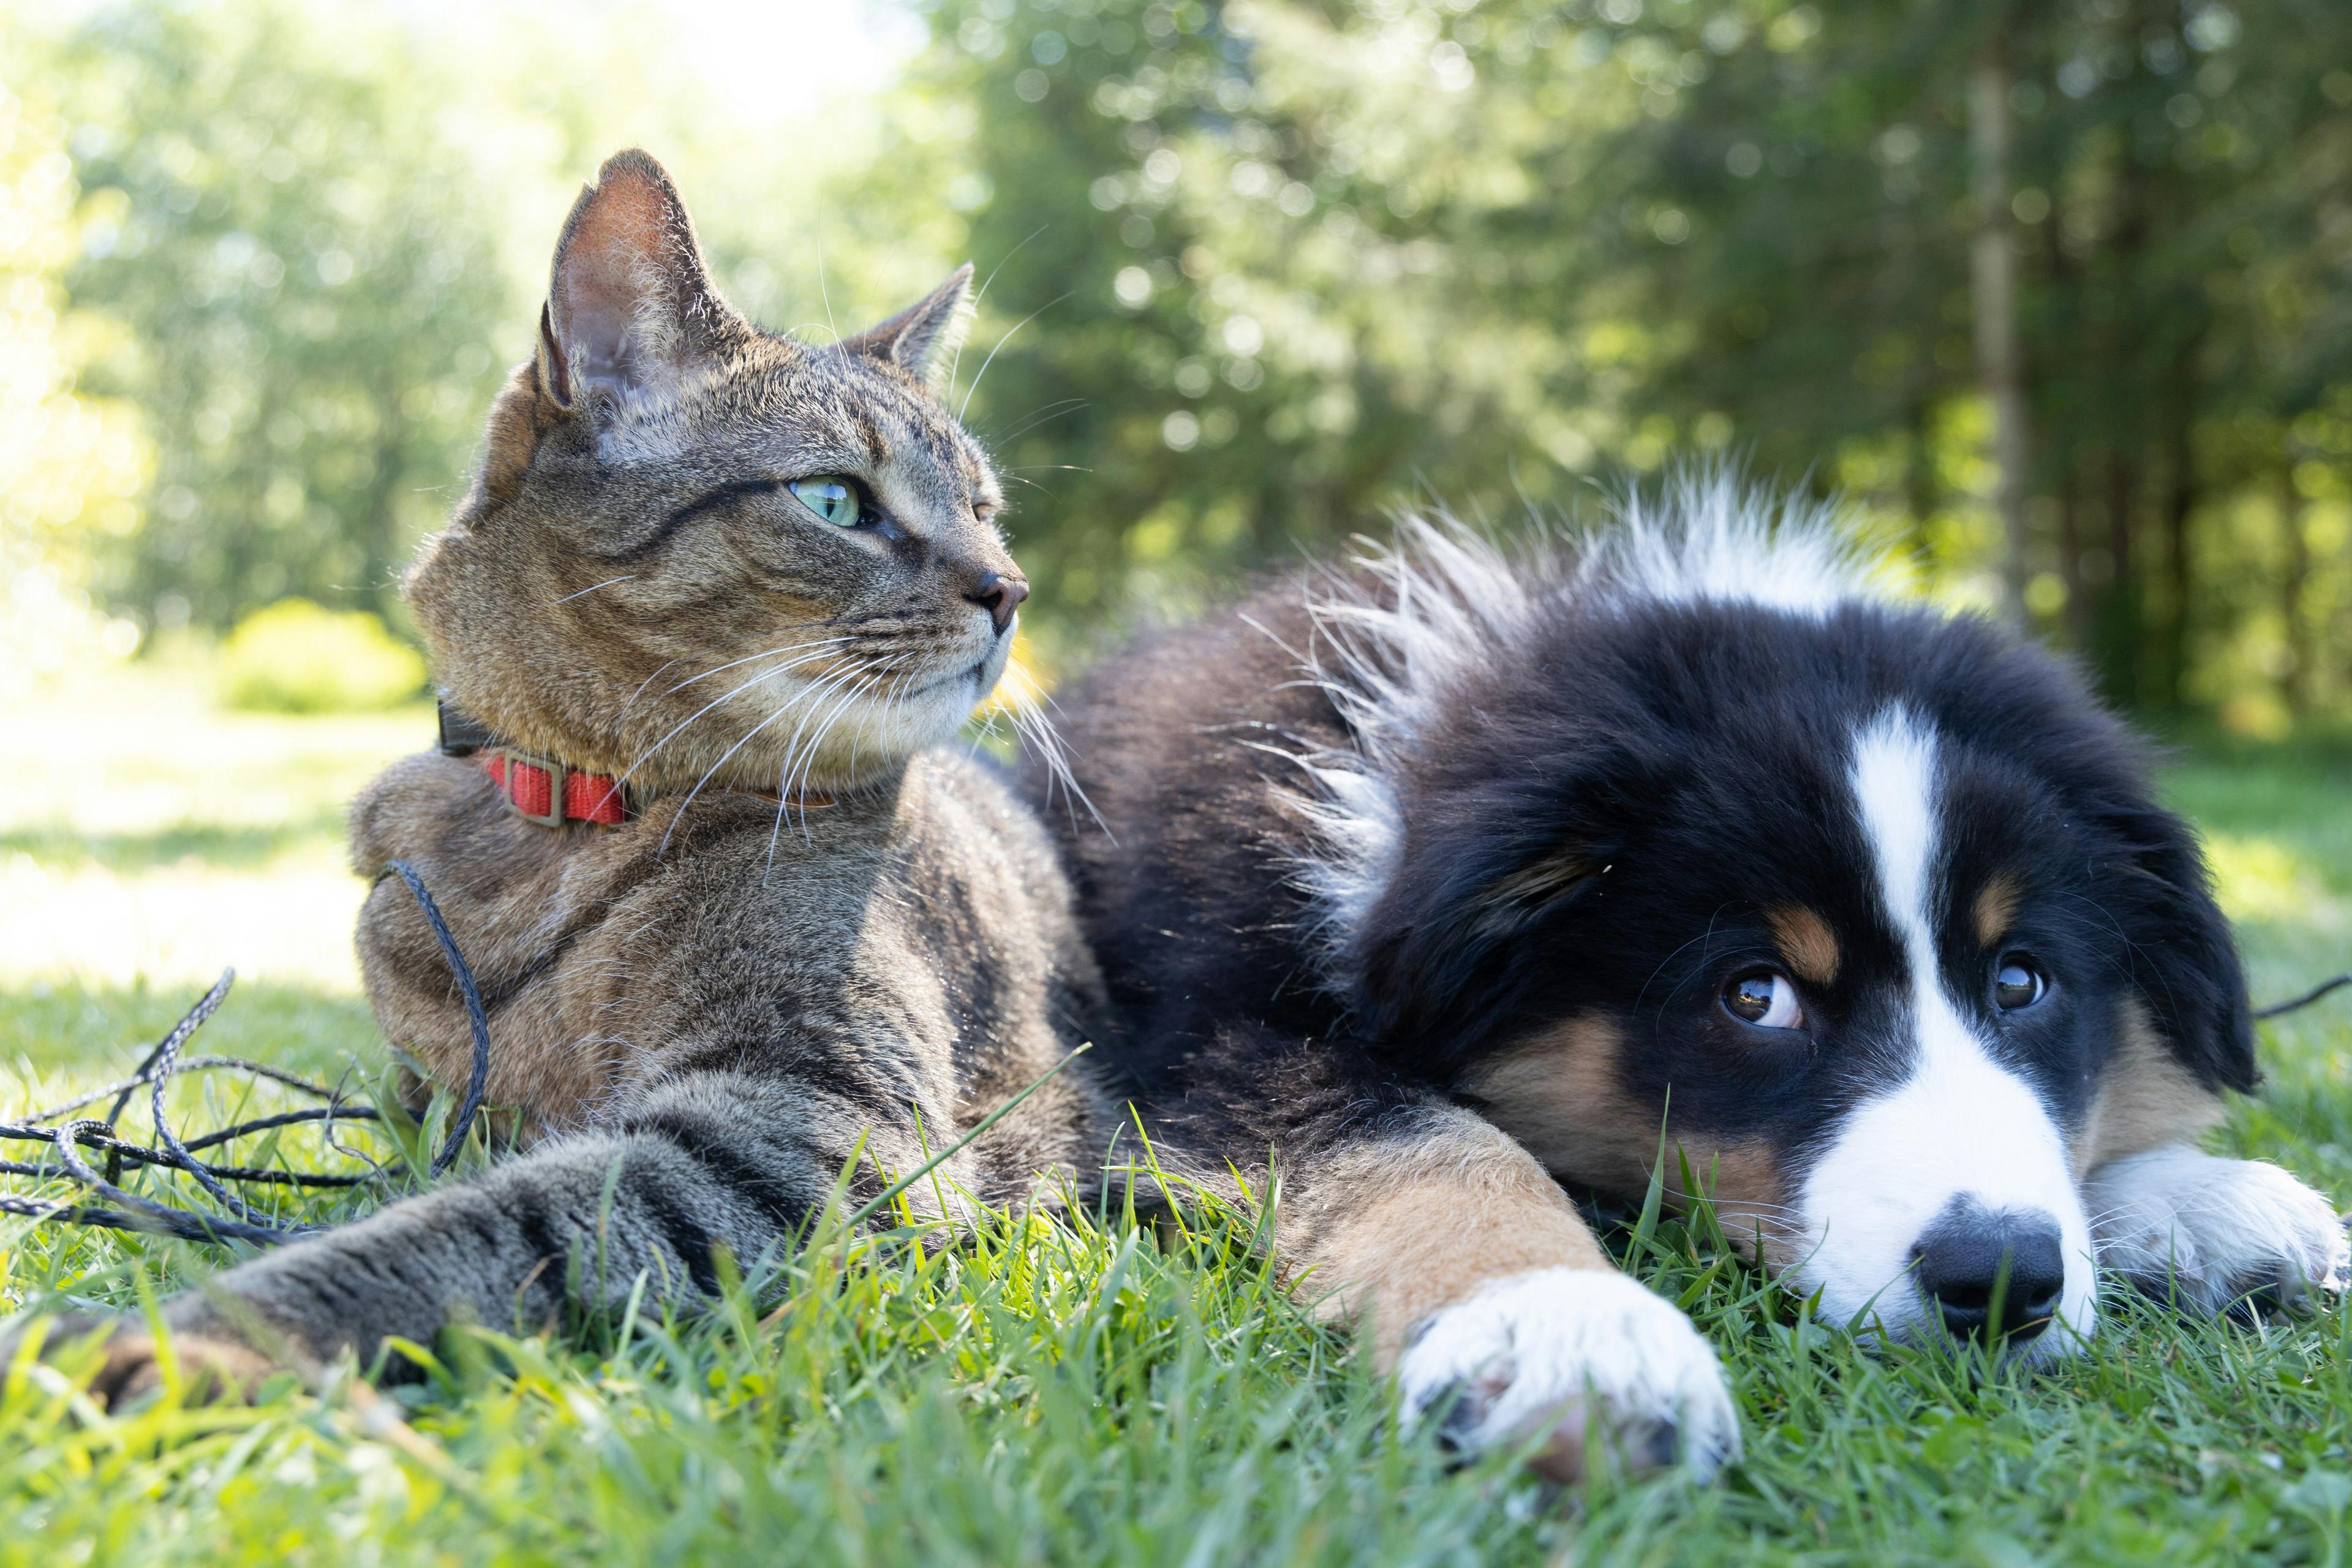 A tabby cat wearing a red collar sits on grass next to a black and white puppy lying down.